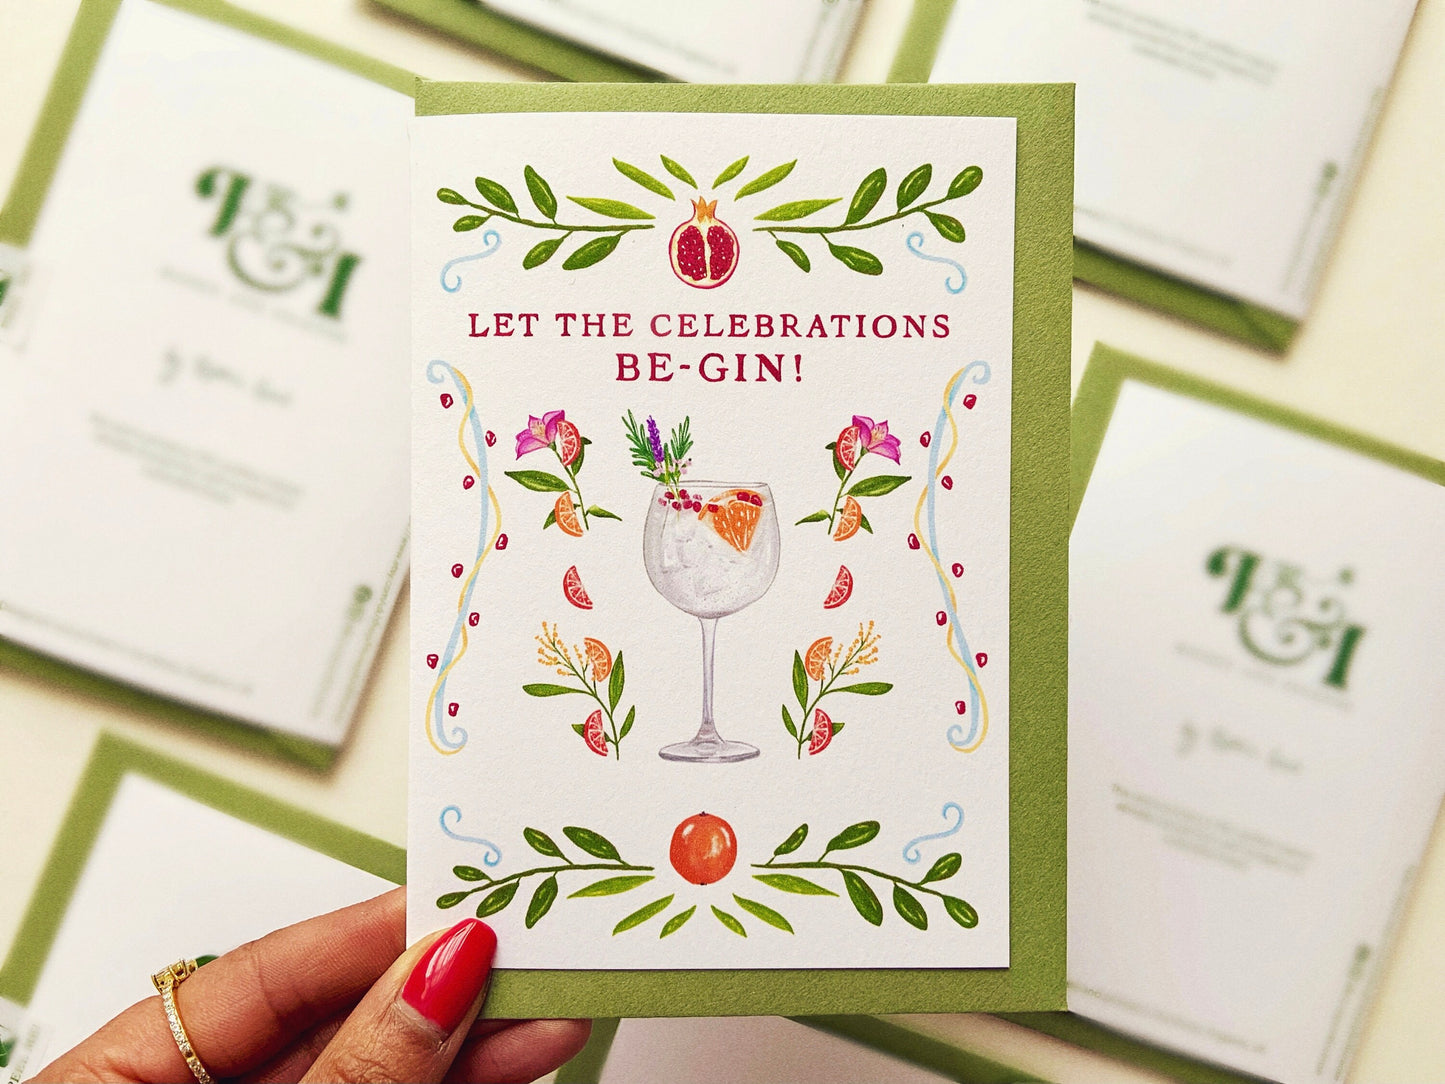 Gin pun greetings card, reads "Let the celebrations be-gin!"